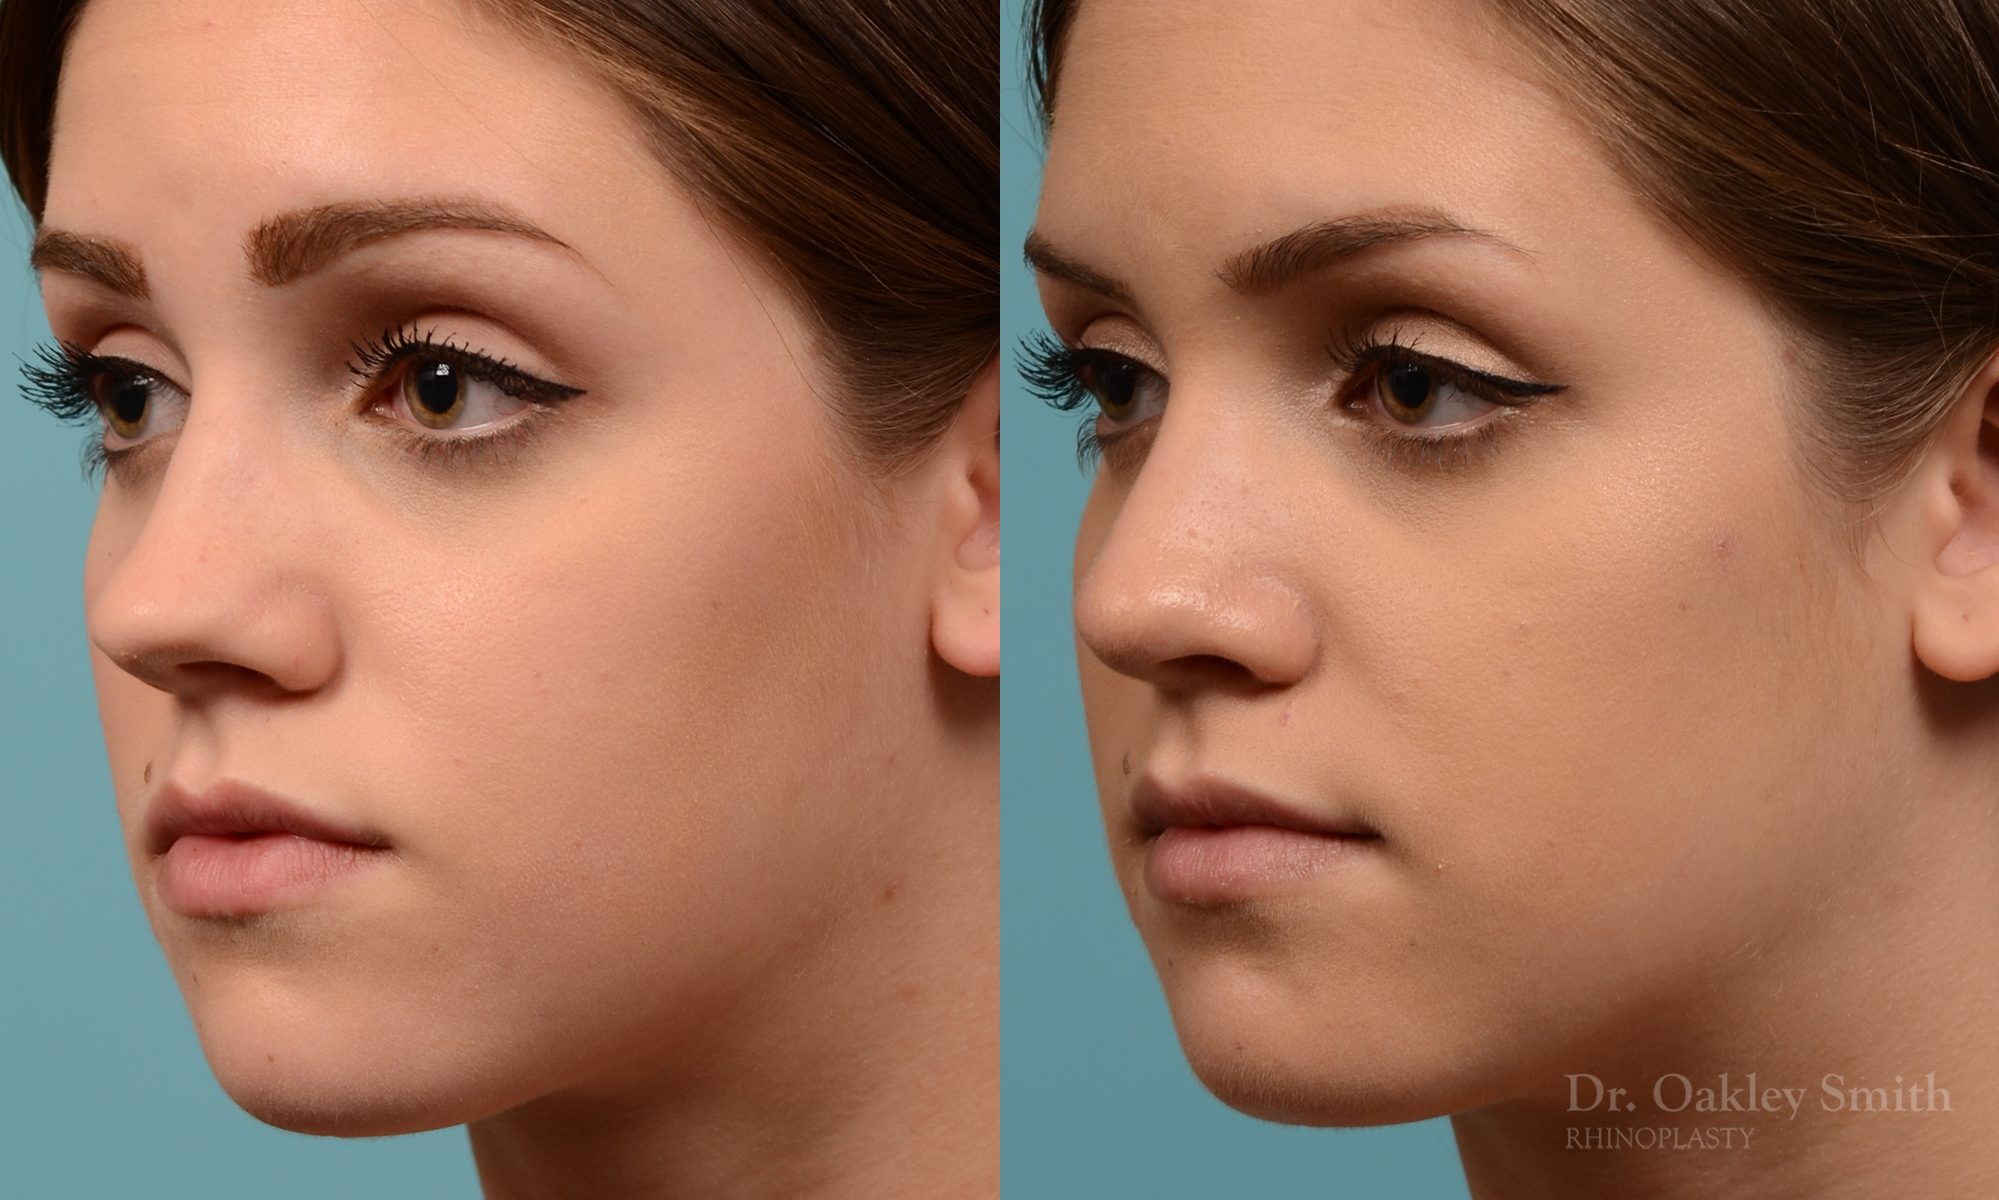 Rhinoplasty to smoothen the tip of nose